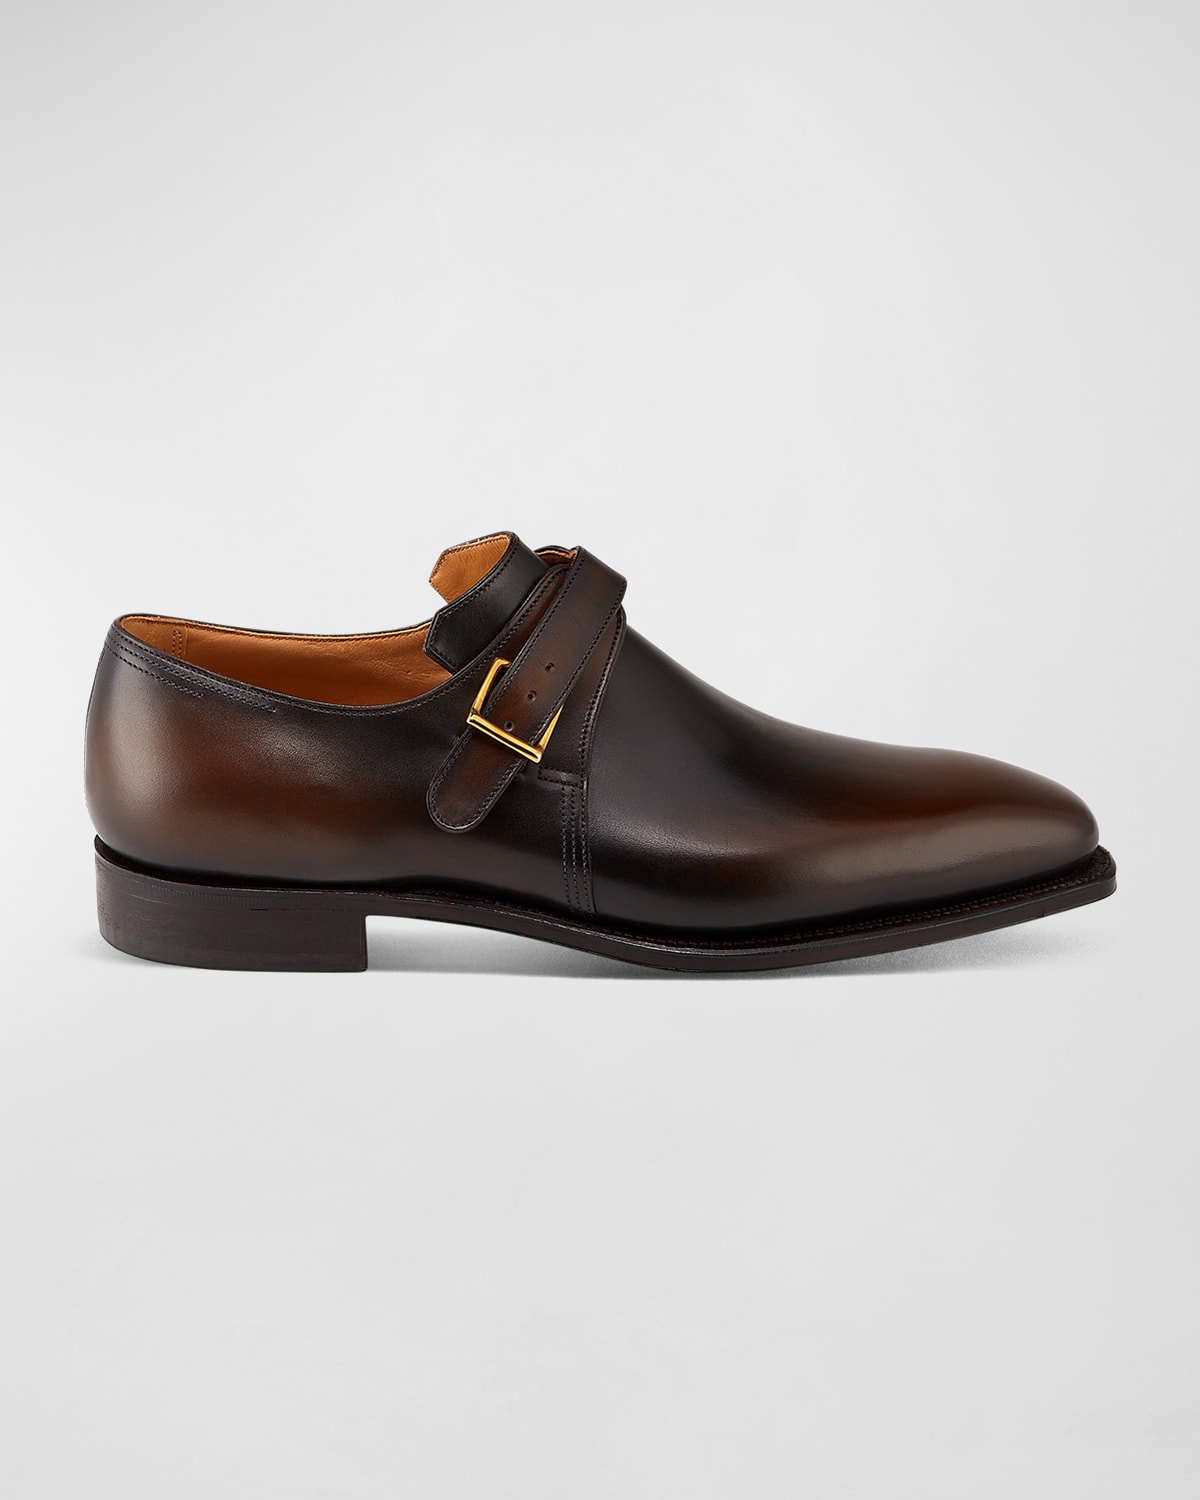 Corthay Men's Arca Leather Monk-Strap Loafers